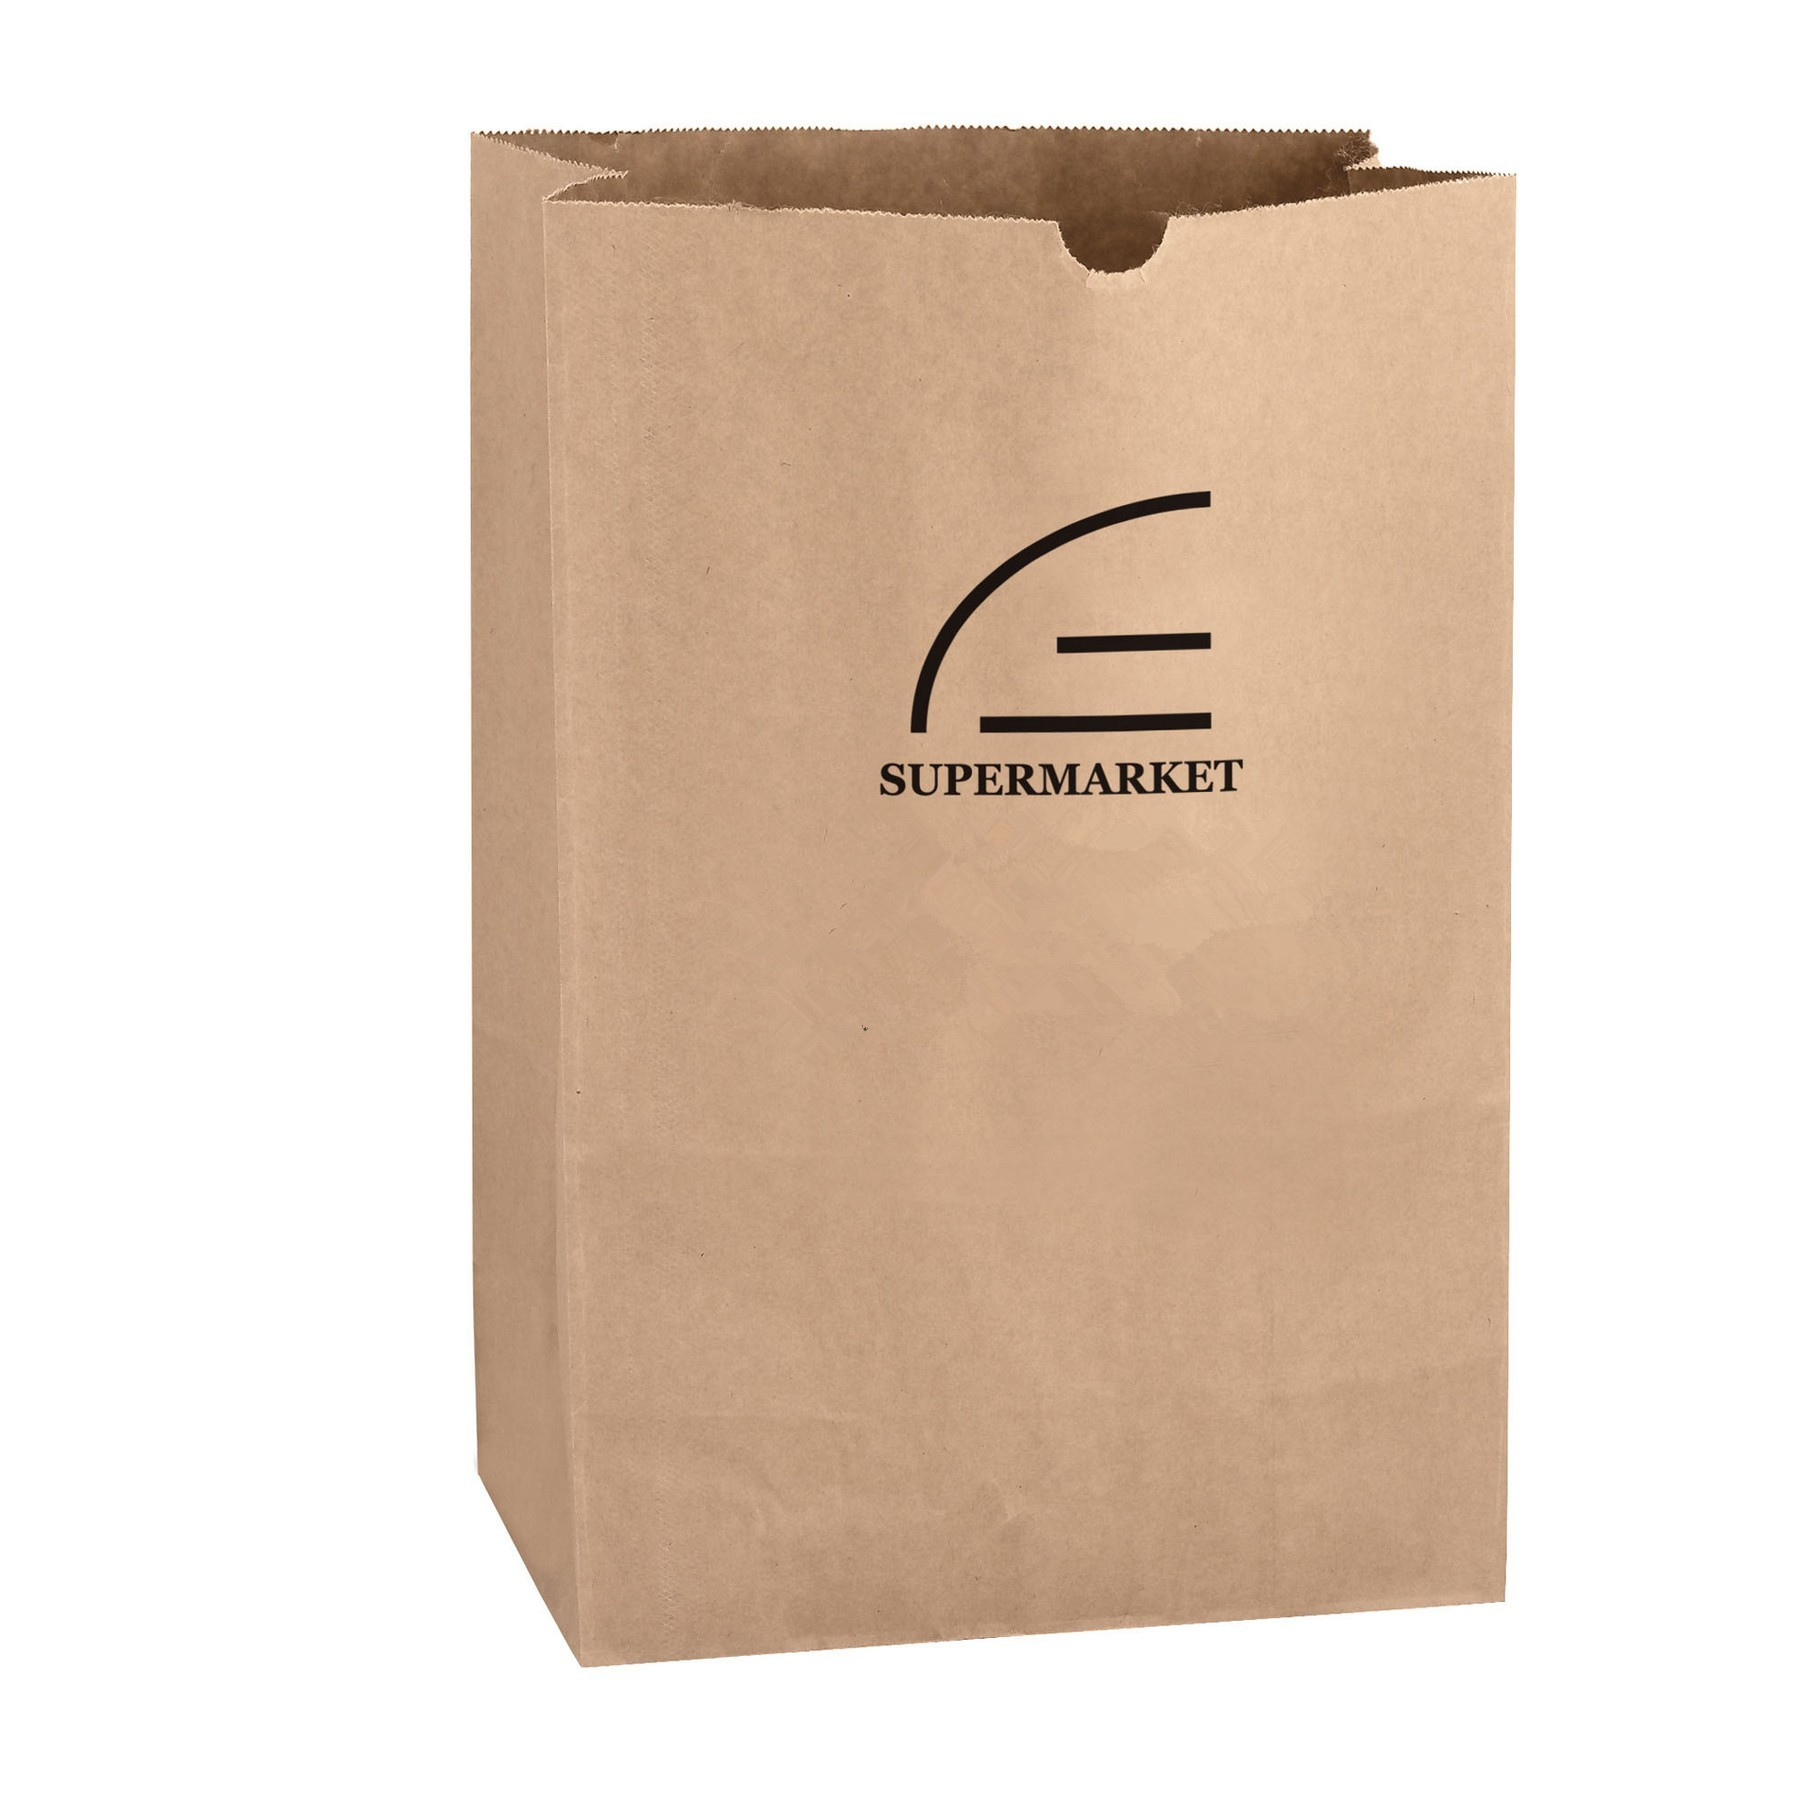 Promotional Grocery Bag